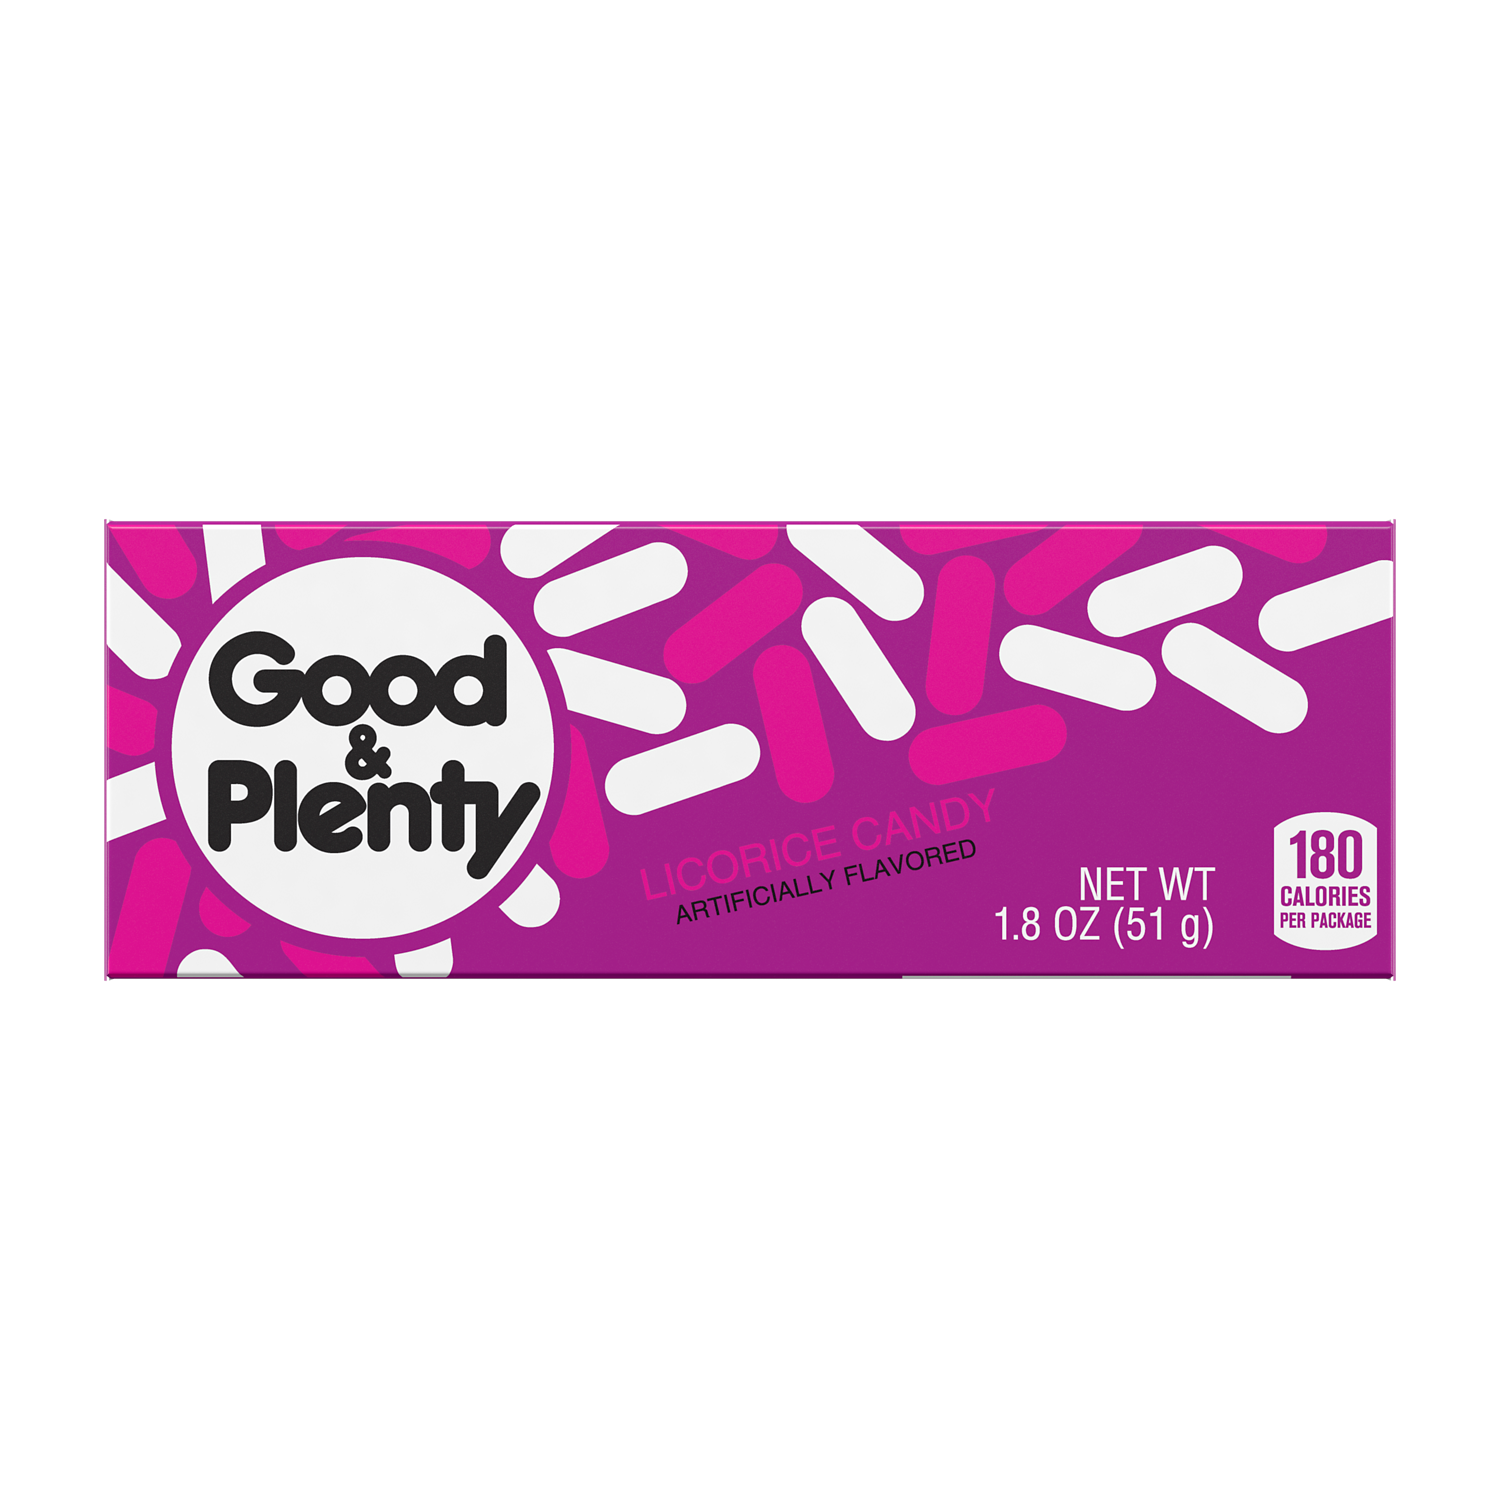 GOOD & PLENTY Licorice Candy, 1.8 oz box - Front of Package